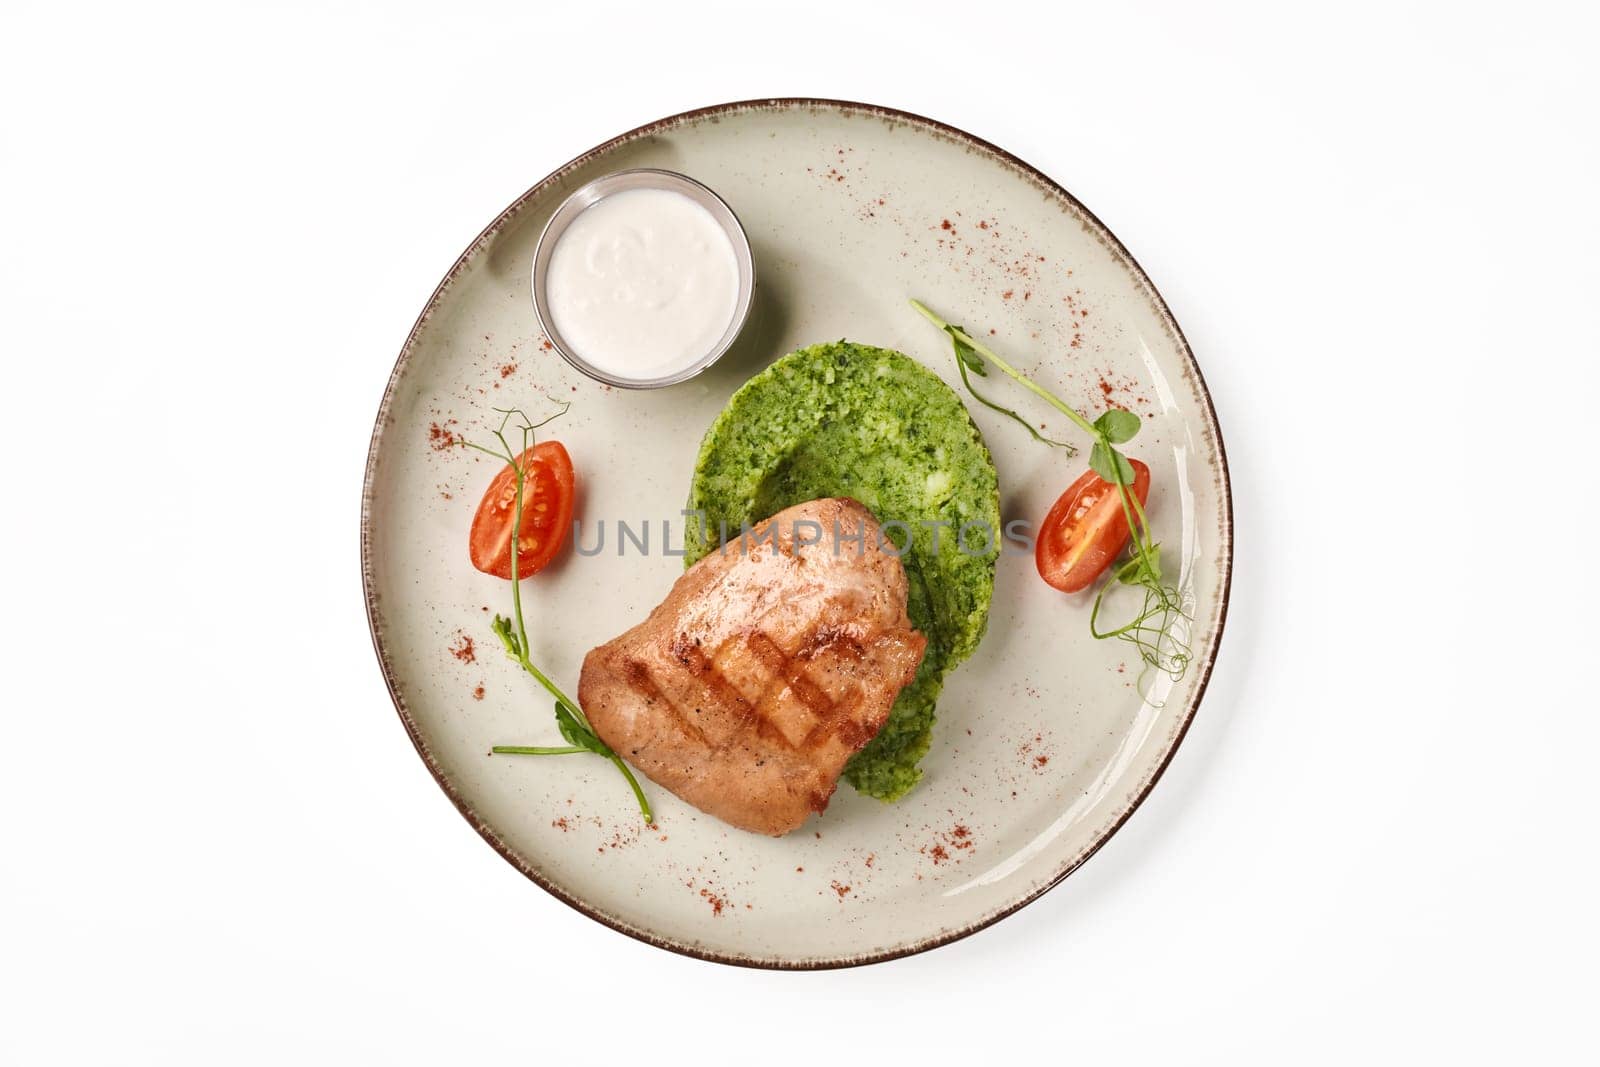 Top view of healthy grilled chicken breast served on bed of green smooth broccoli puree with fresh tomato slices and side of creamy sauce on plate, isolated on white background